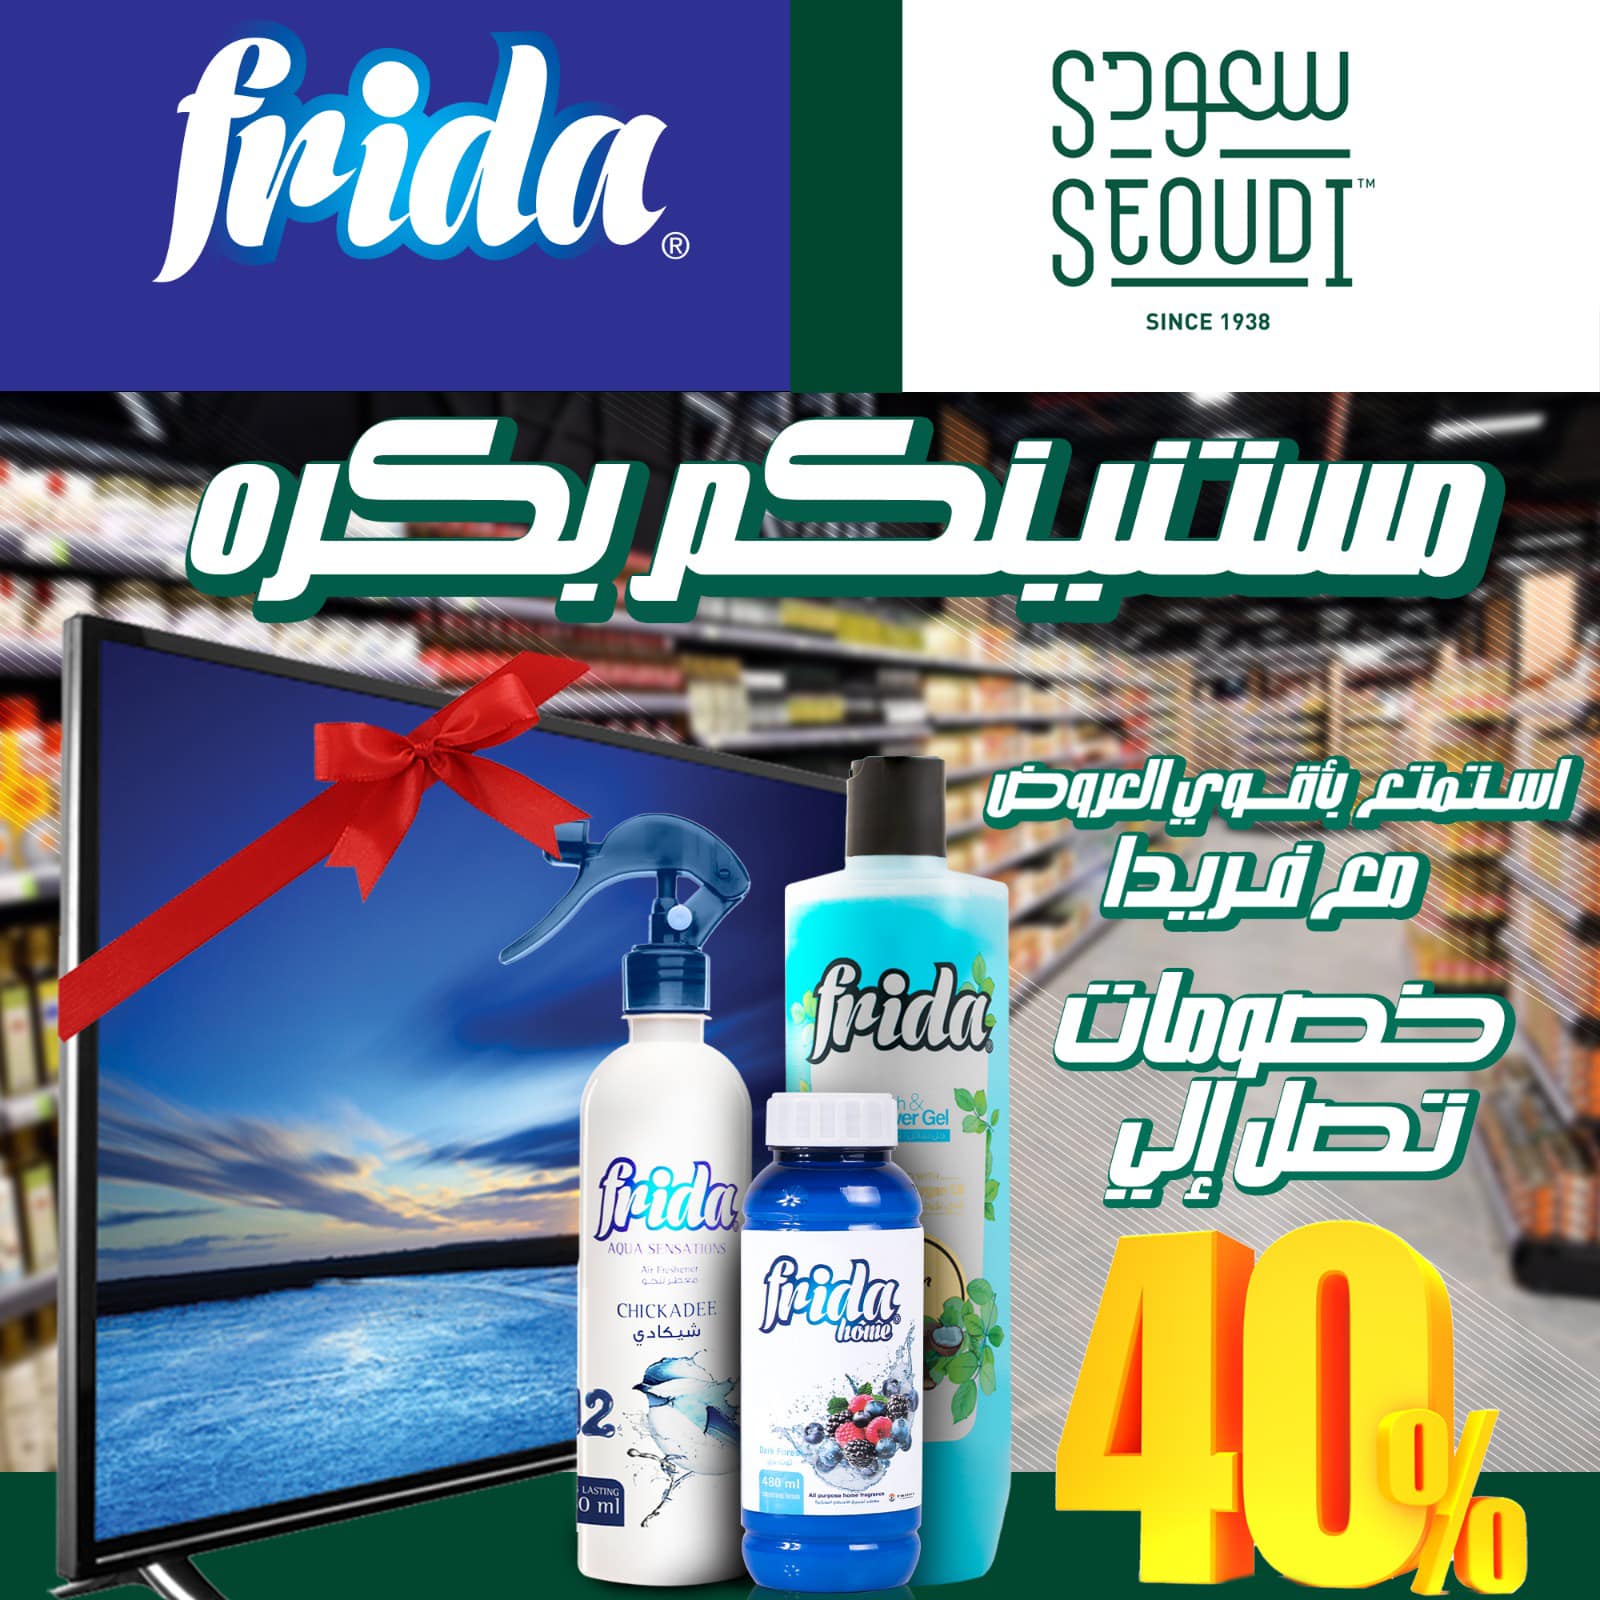 Frida Strongest offers in Saudi